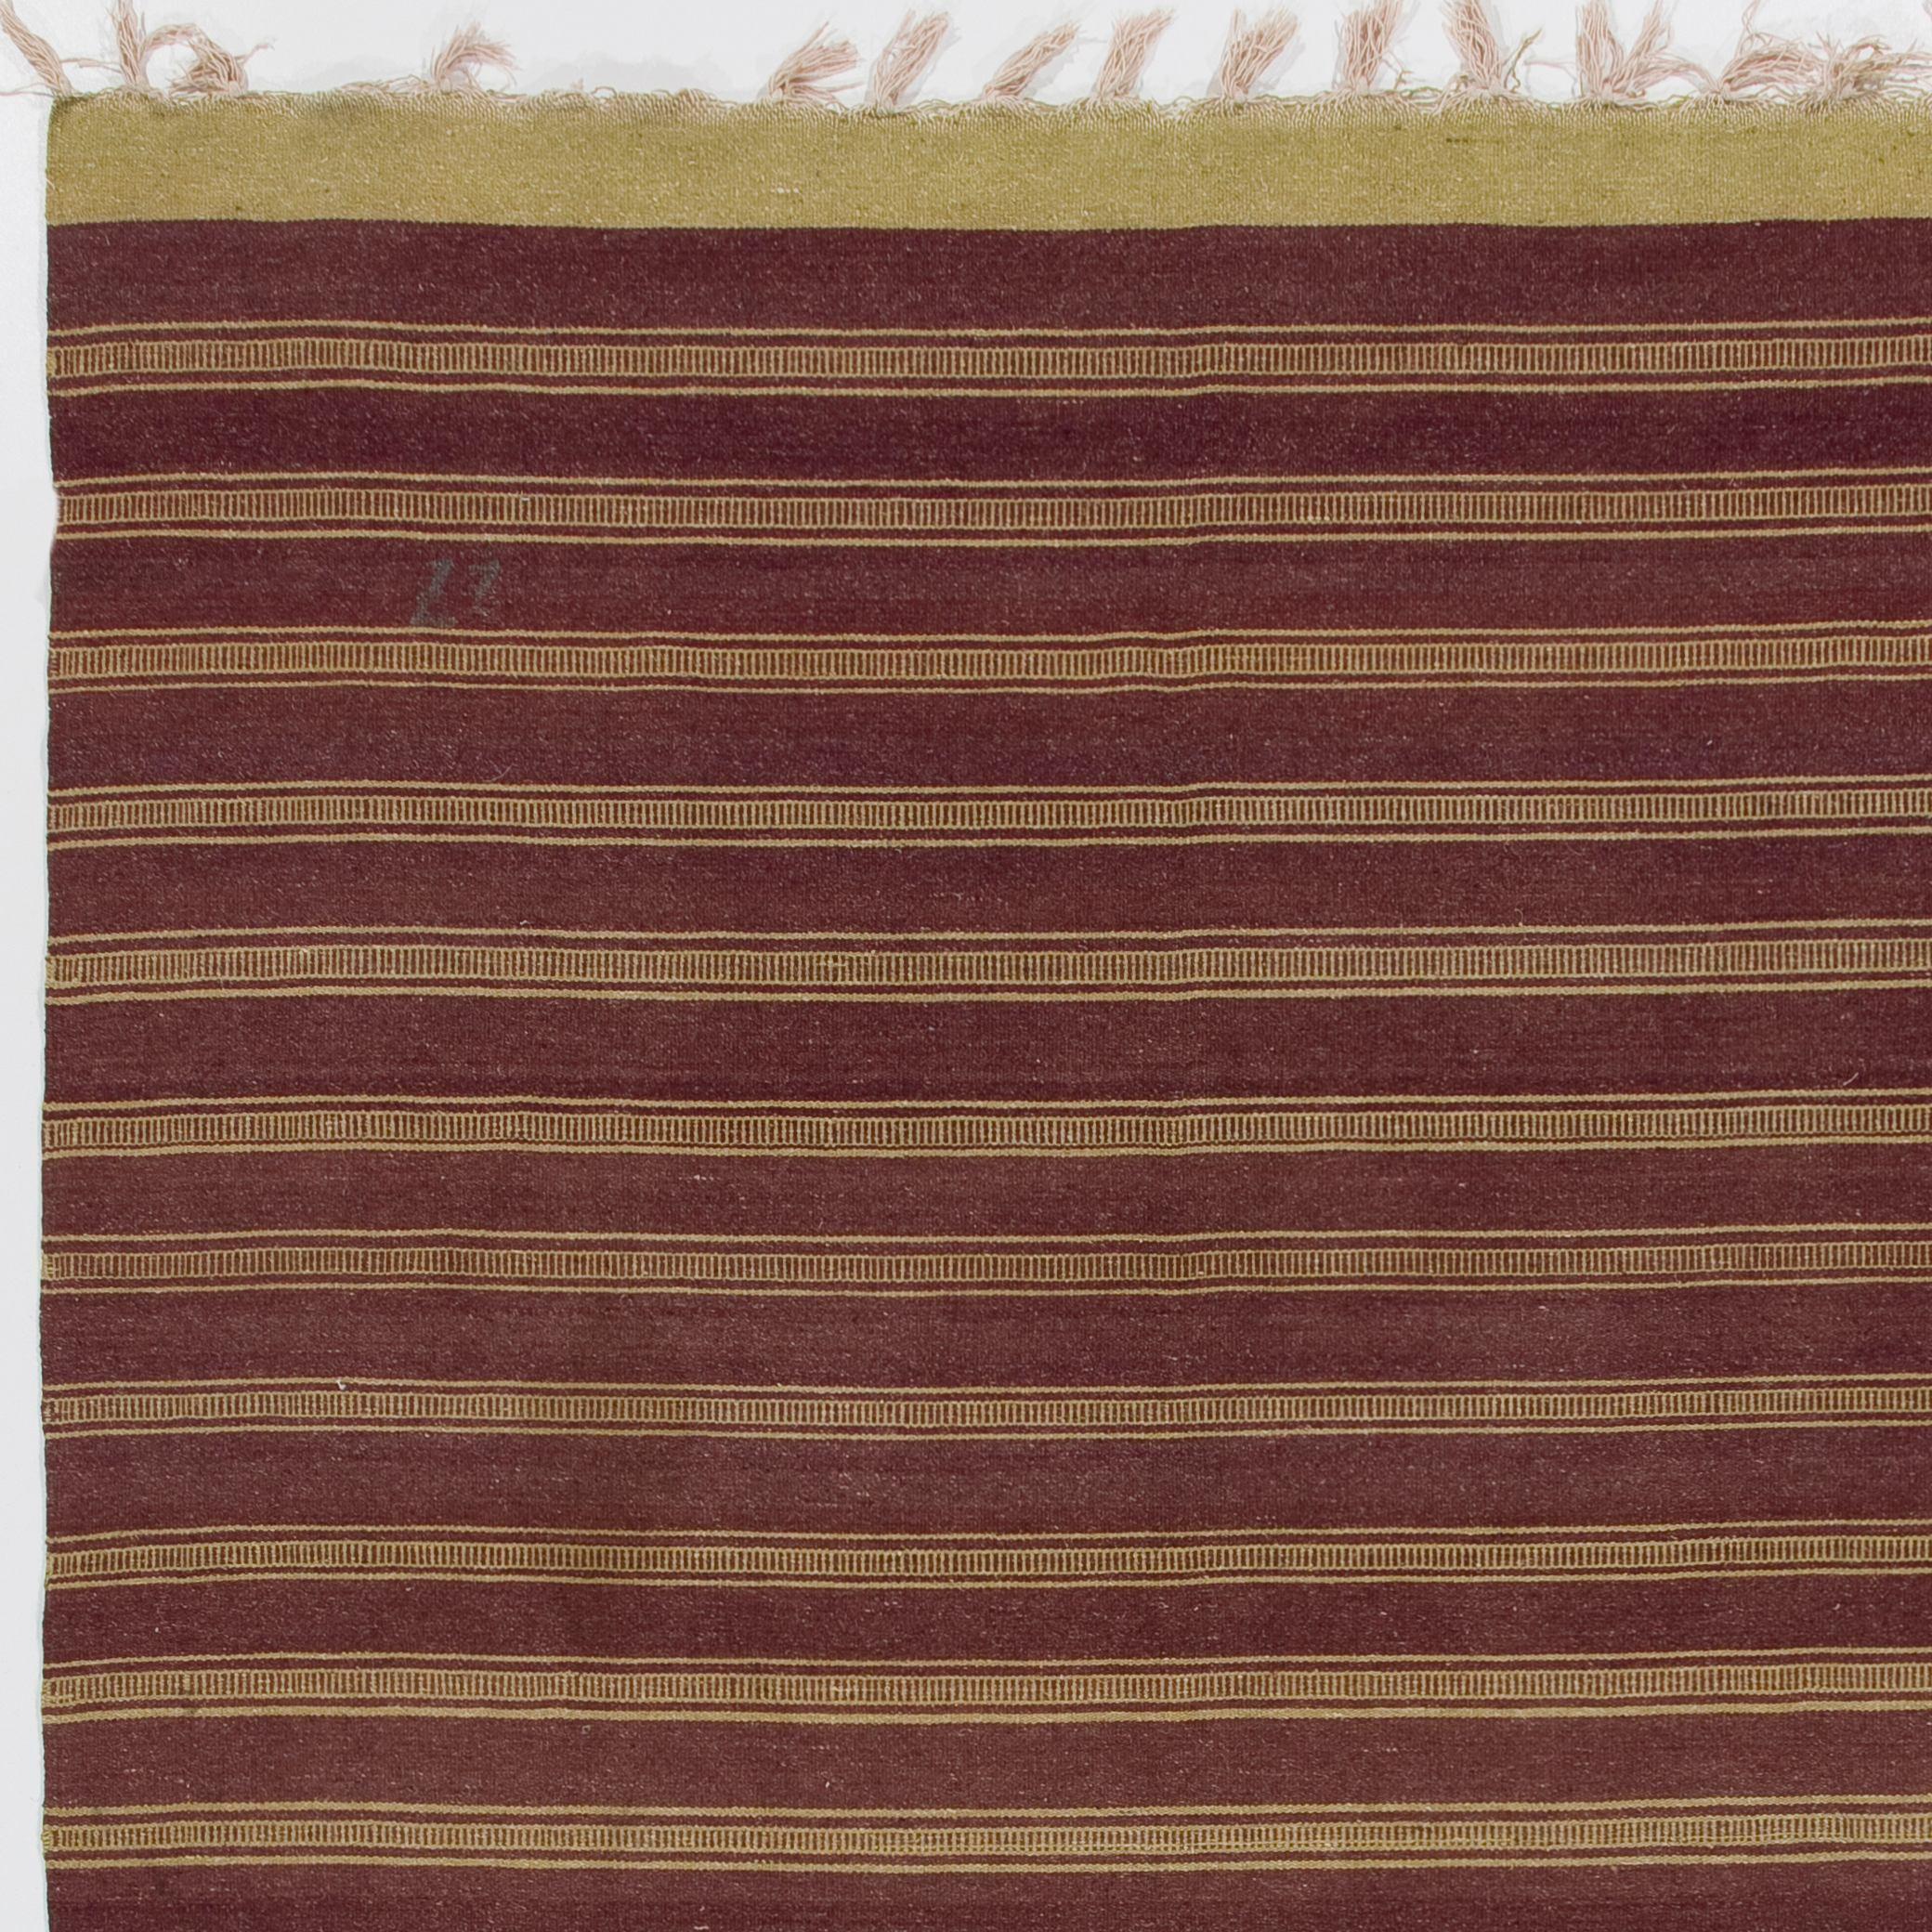 Hand-Woven 5.6x9 Ft Vintage Striped Handwoven Turkish Kilim 'Flat Weave', All Wool For Sale